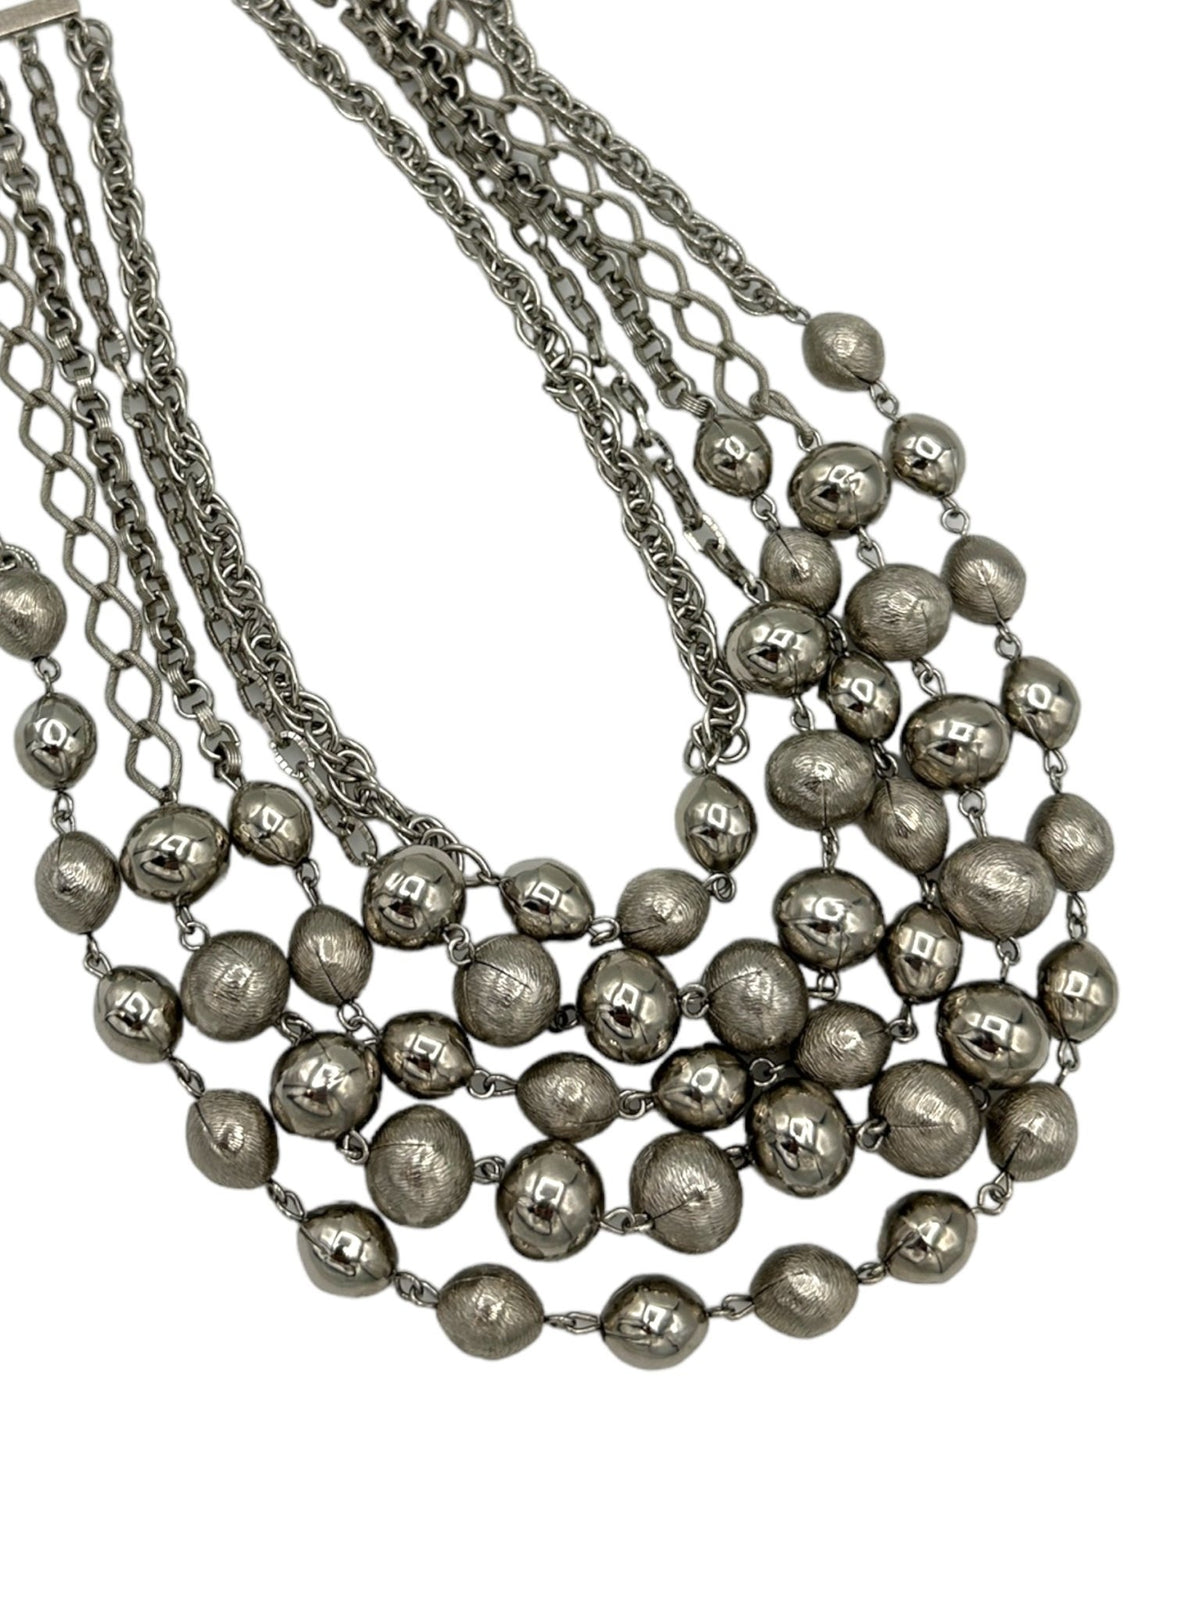 Vintage Silver Layered Long Multi-Strand Chain Textured Bead Necklace - 24 Wishes Vintage Jewelry